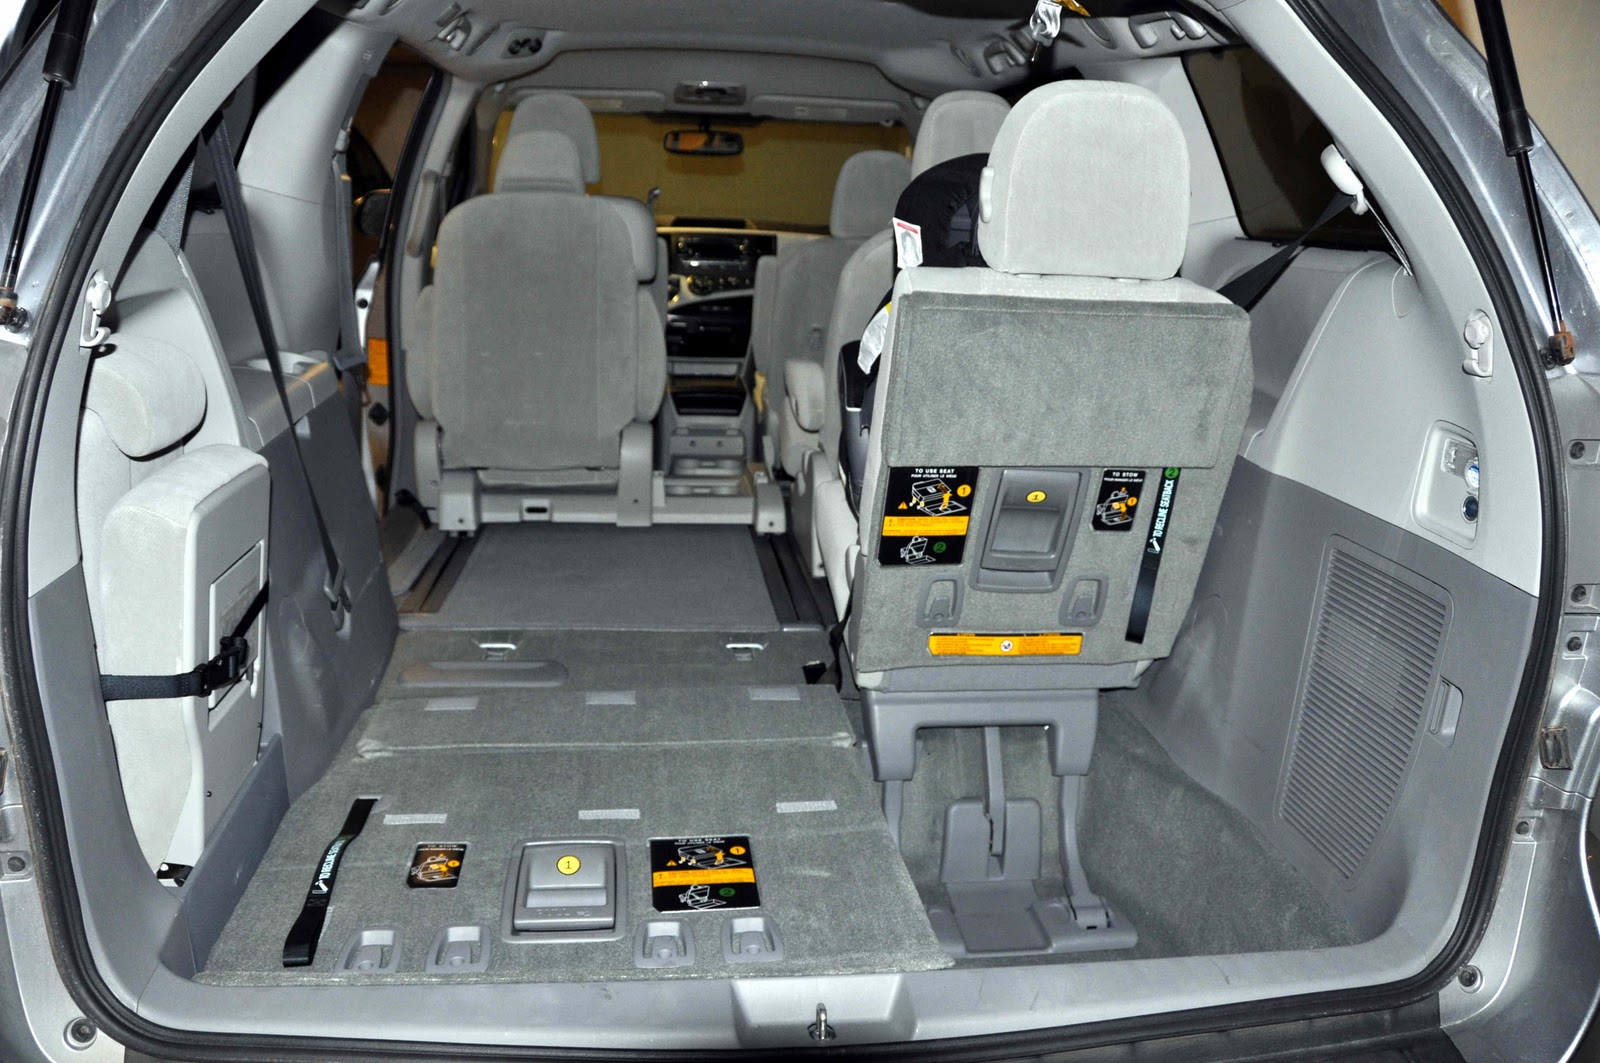 2021 Toyota Sienna Middle Seat Removal - Aulaiestpdm Blog